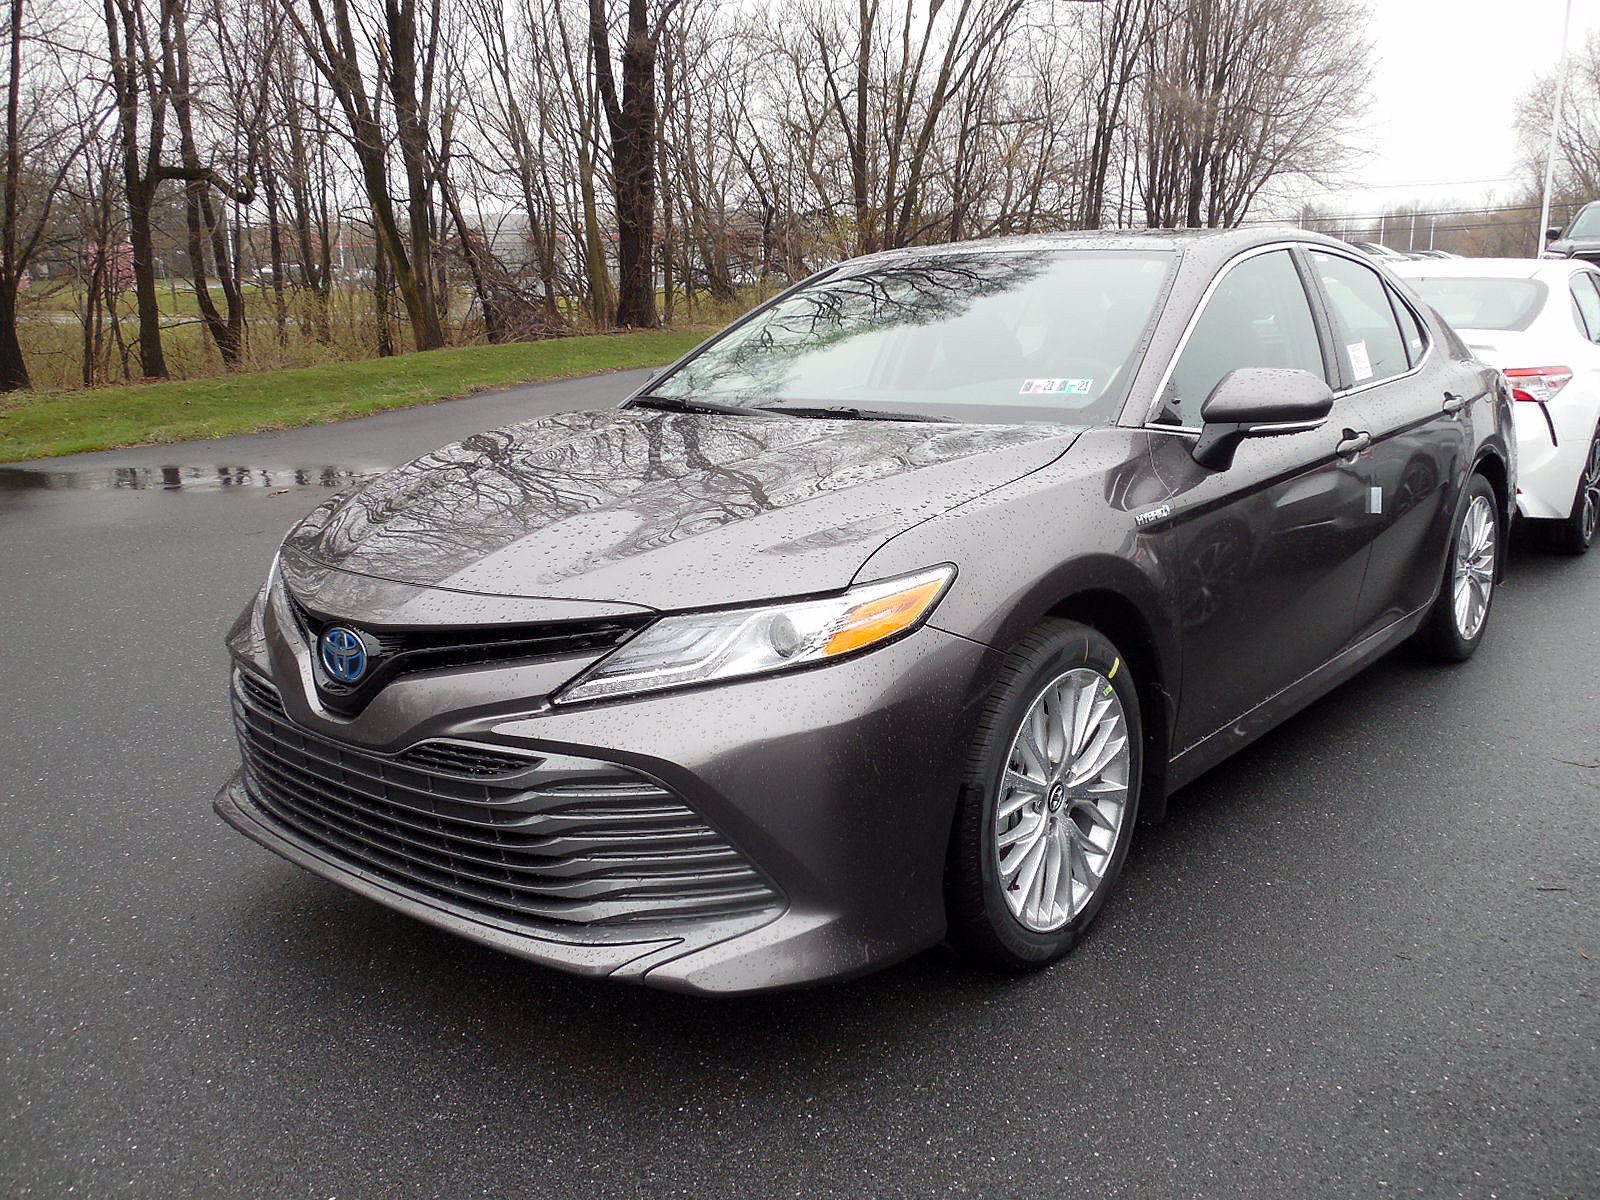 New 2020 Toyota Camry Hybrid XLE 4dr Car in East Petersburg #14819 ...
